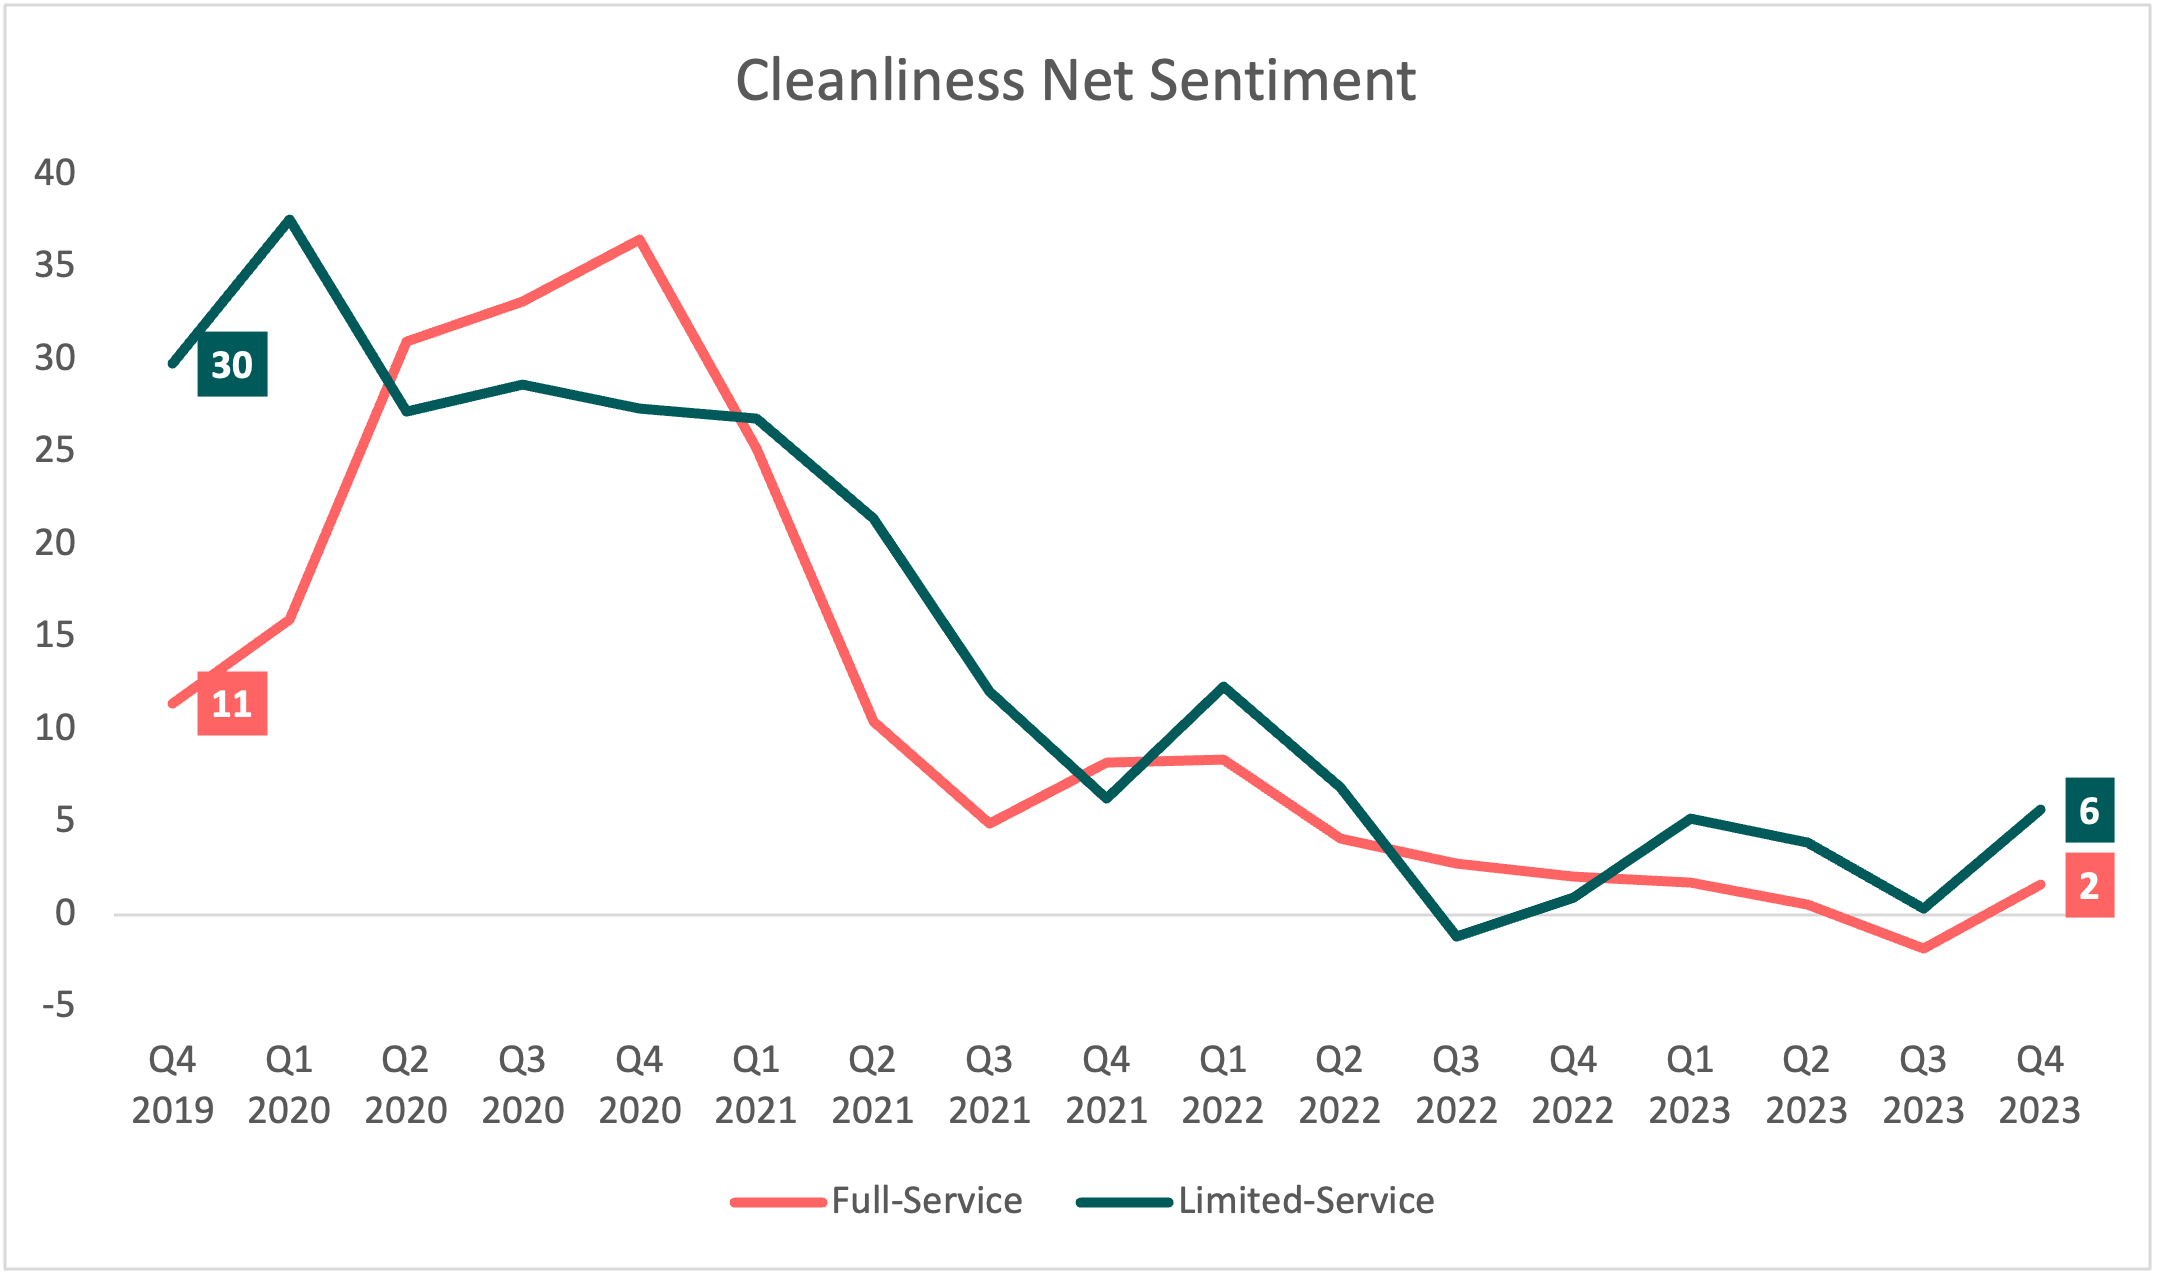 Cleanliness Net Sentiment. Full service and Limited Service 2019-2023